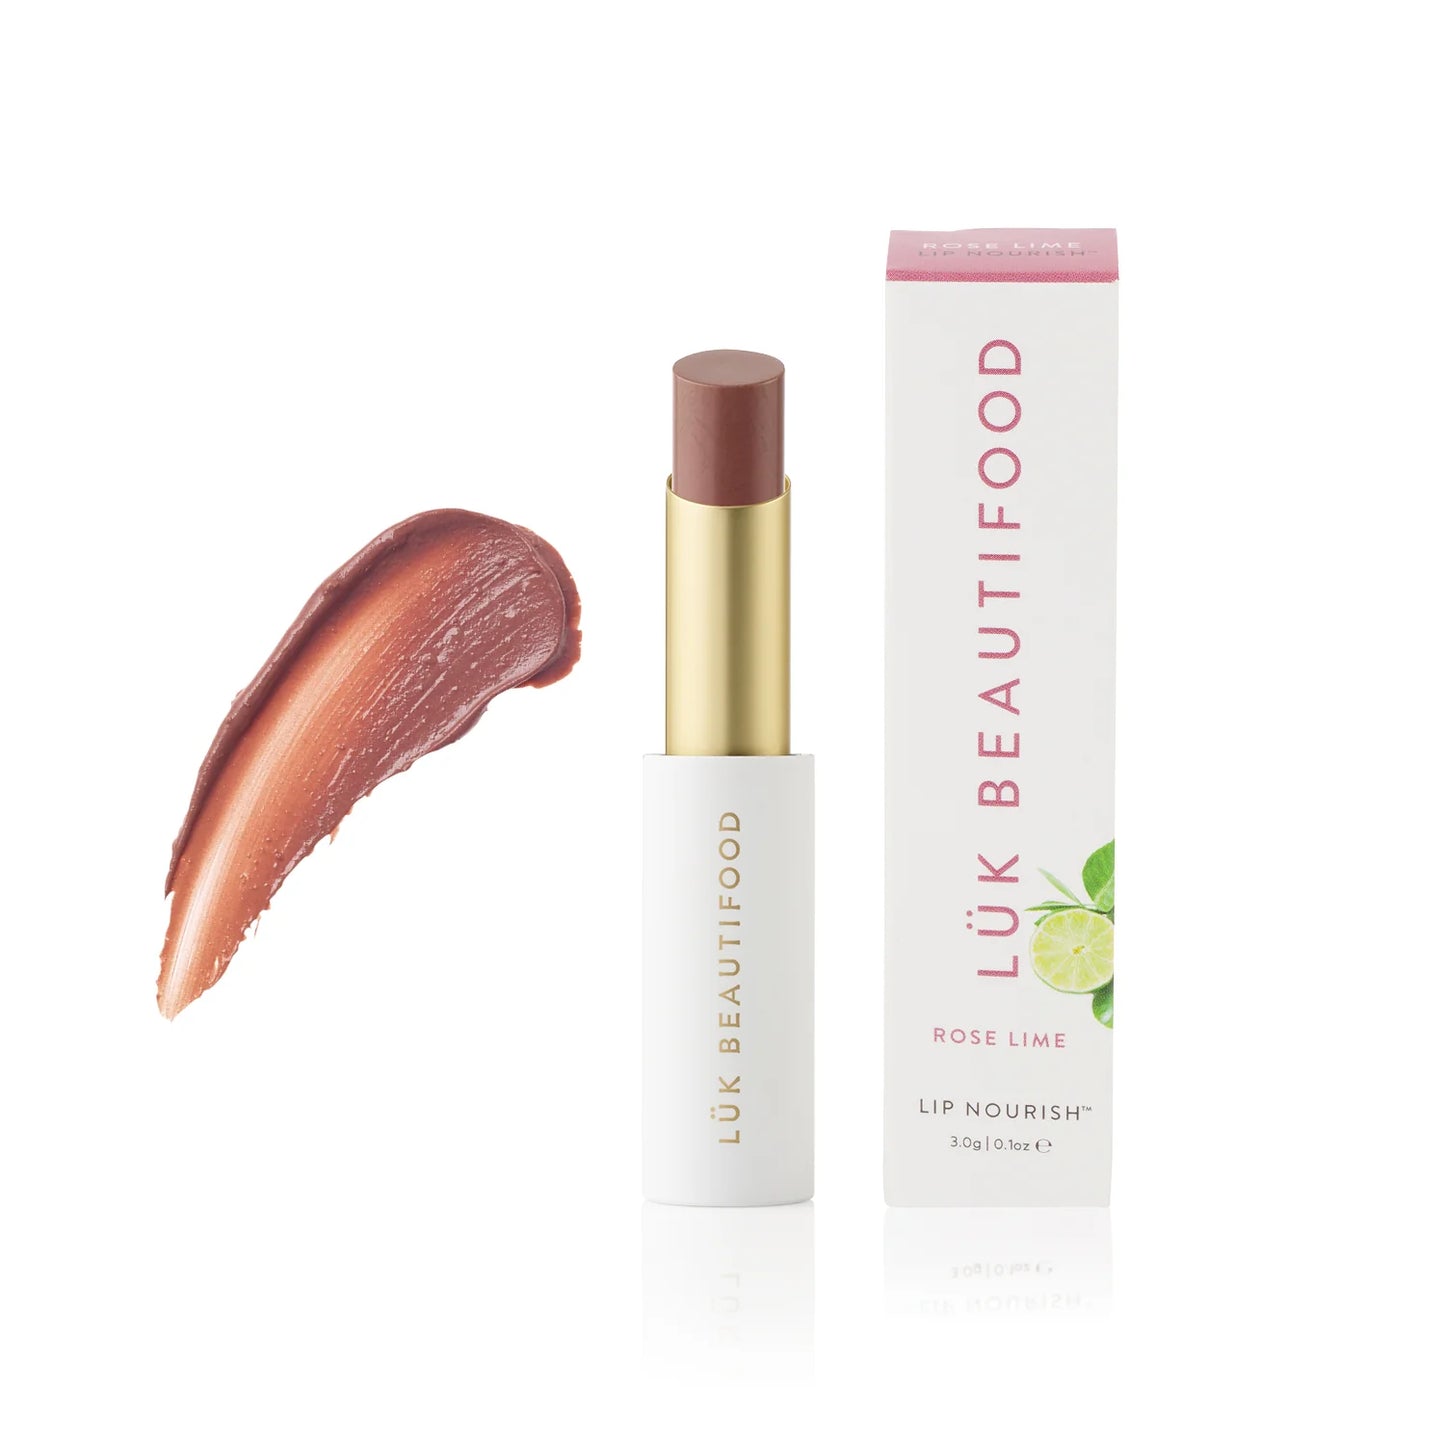 Lip Nourish™ - Rose Lime Warm pecan. Sheer coverage. Tastes of lime and ginger.